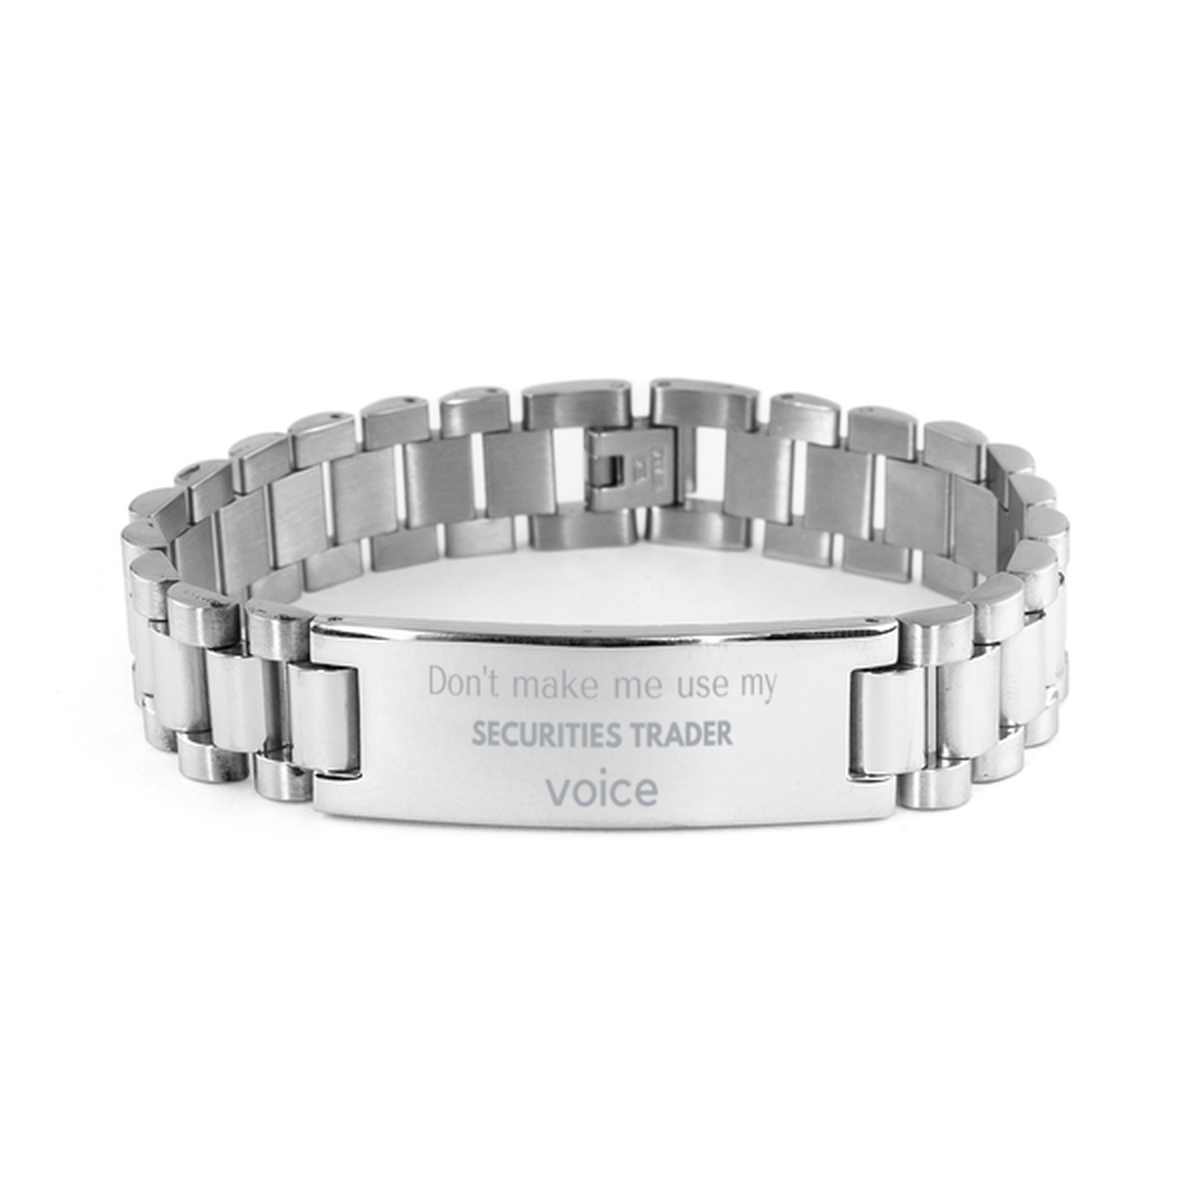 Don't make me use my Securities Trader voice, Sarcasm Securities Trader Gifts, Christmas Securities Trader Ladder Stainless Steel Bracelet Birthday Unique Gifts For Securities Trader Coworkers, Men, Women, Colleague, Friends